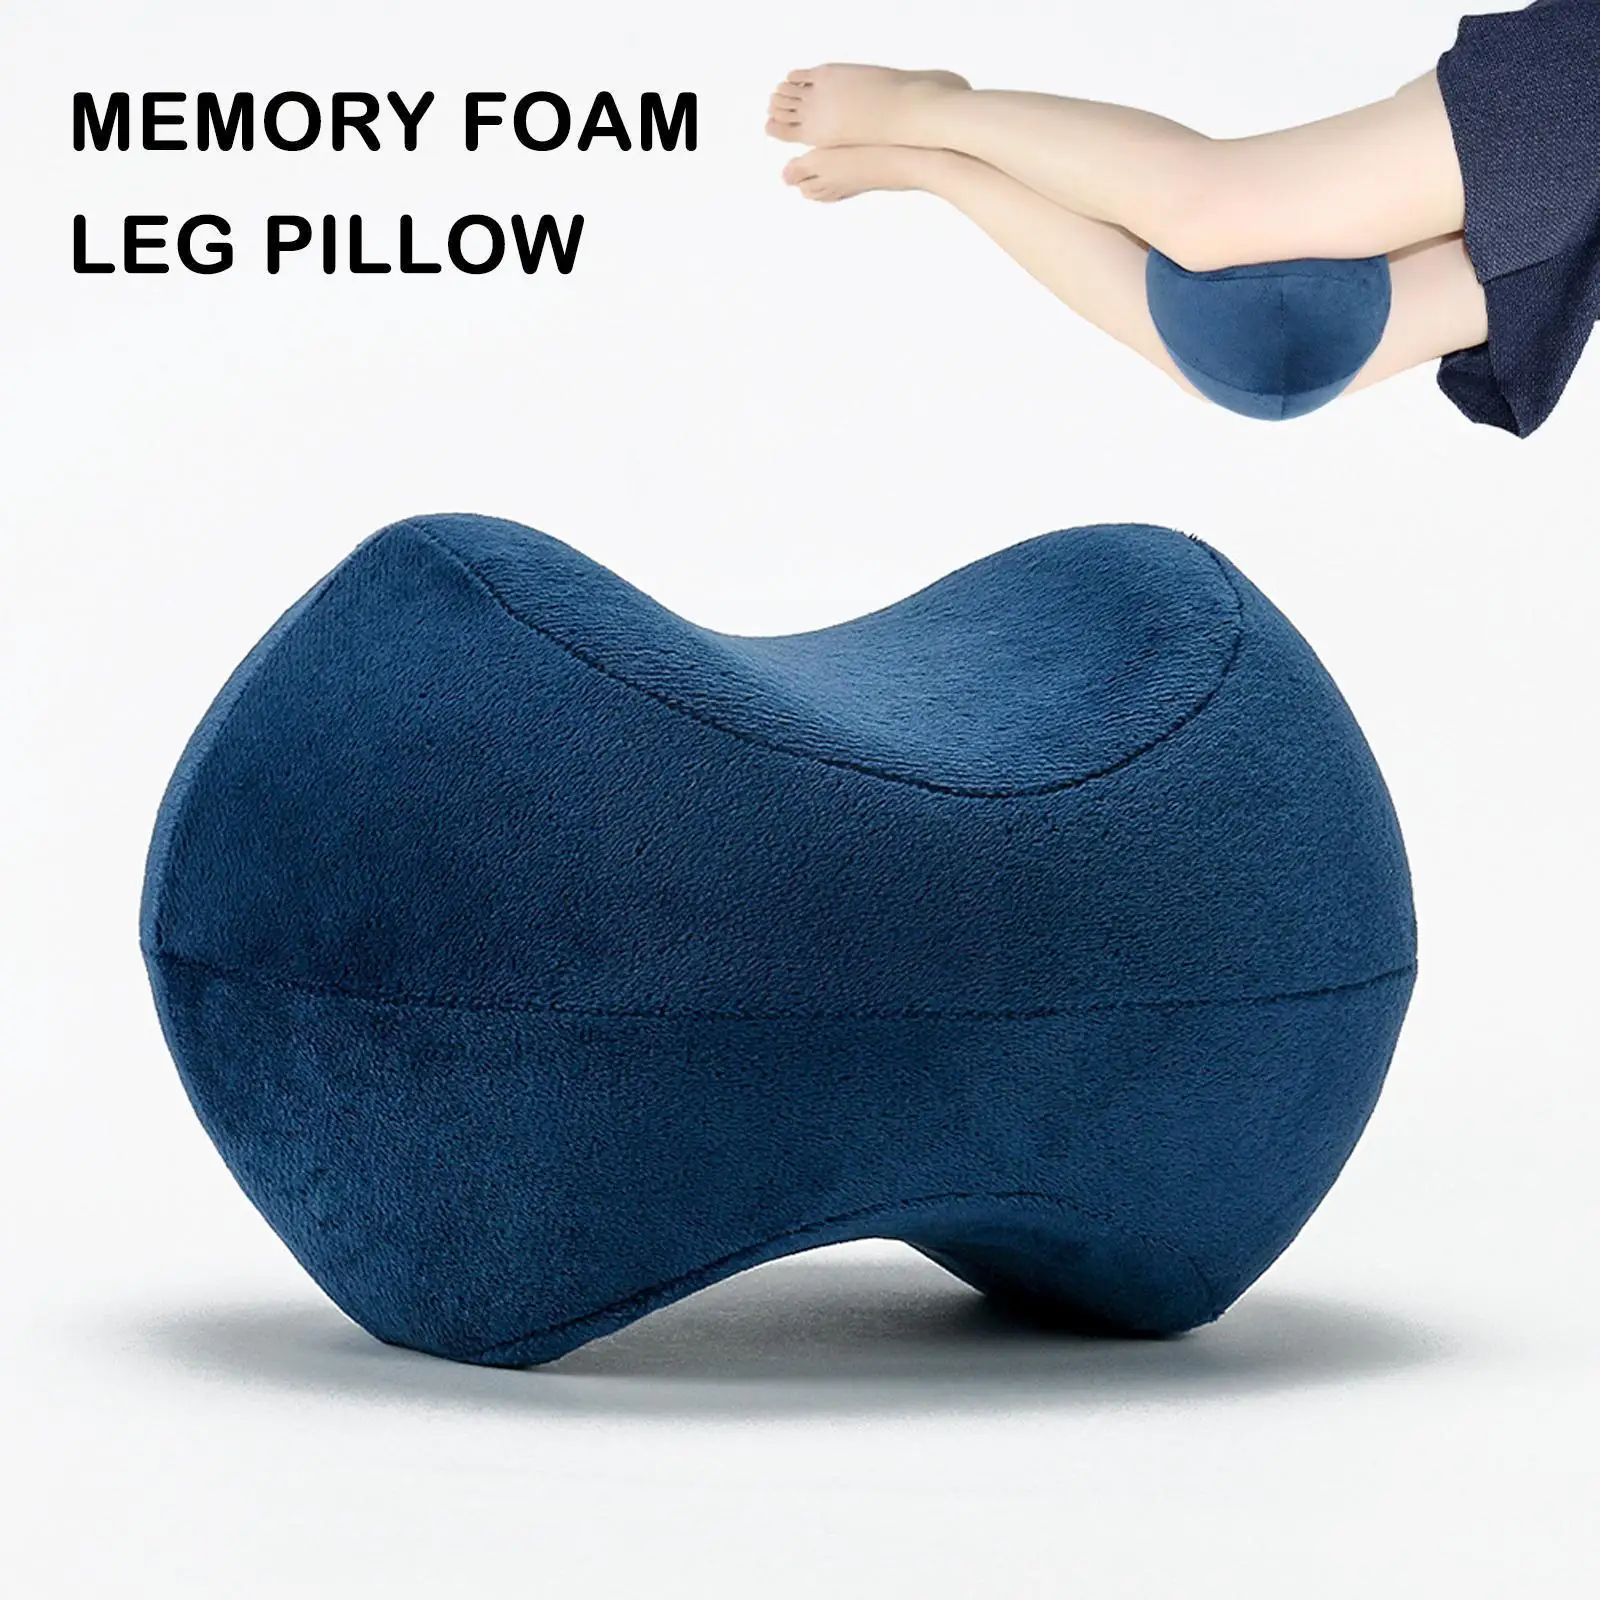 

Orthopedic Pillow for Sleeping Memory Foam Leg Positioner Pillows Knee Support Cushion between the Legs for Hip Pain relief